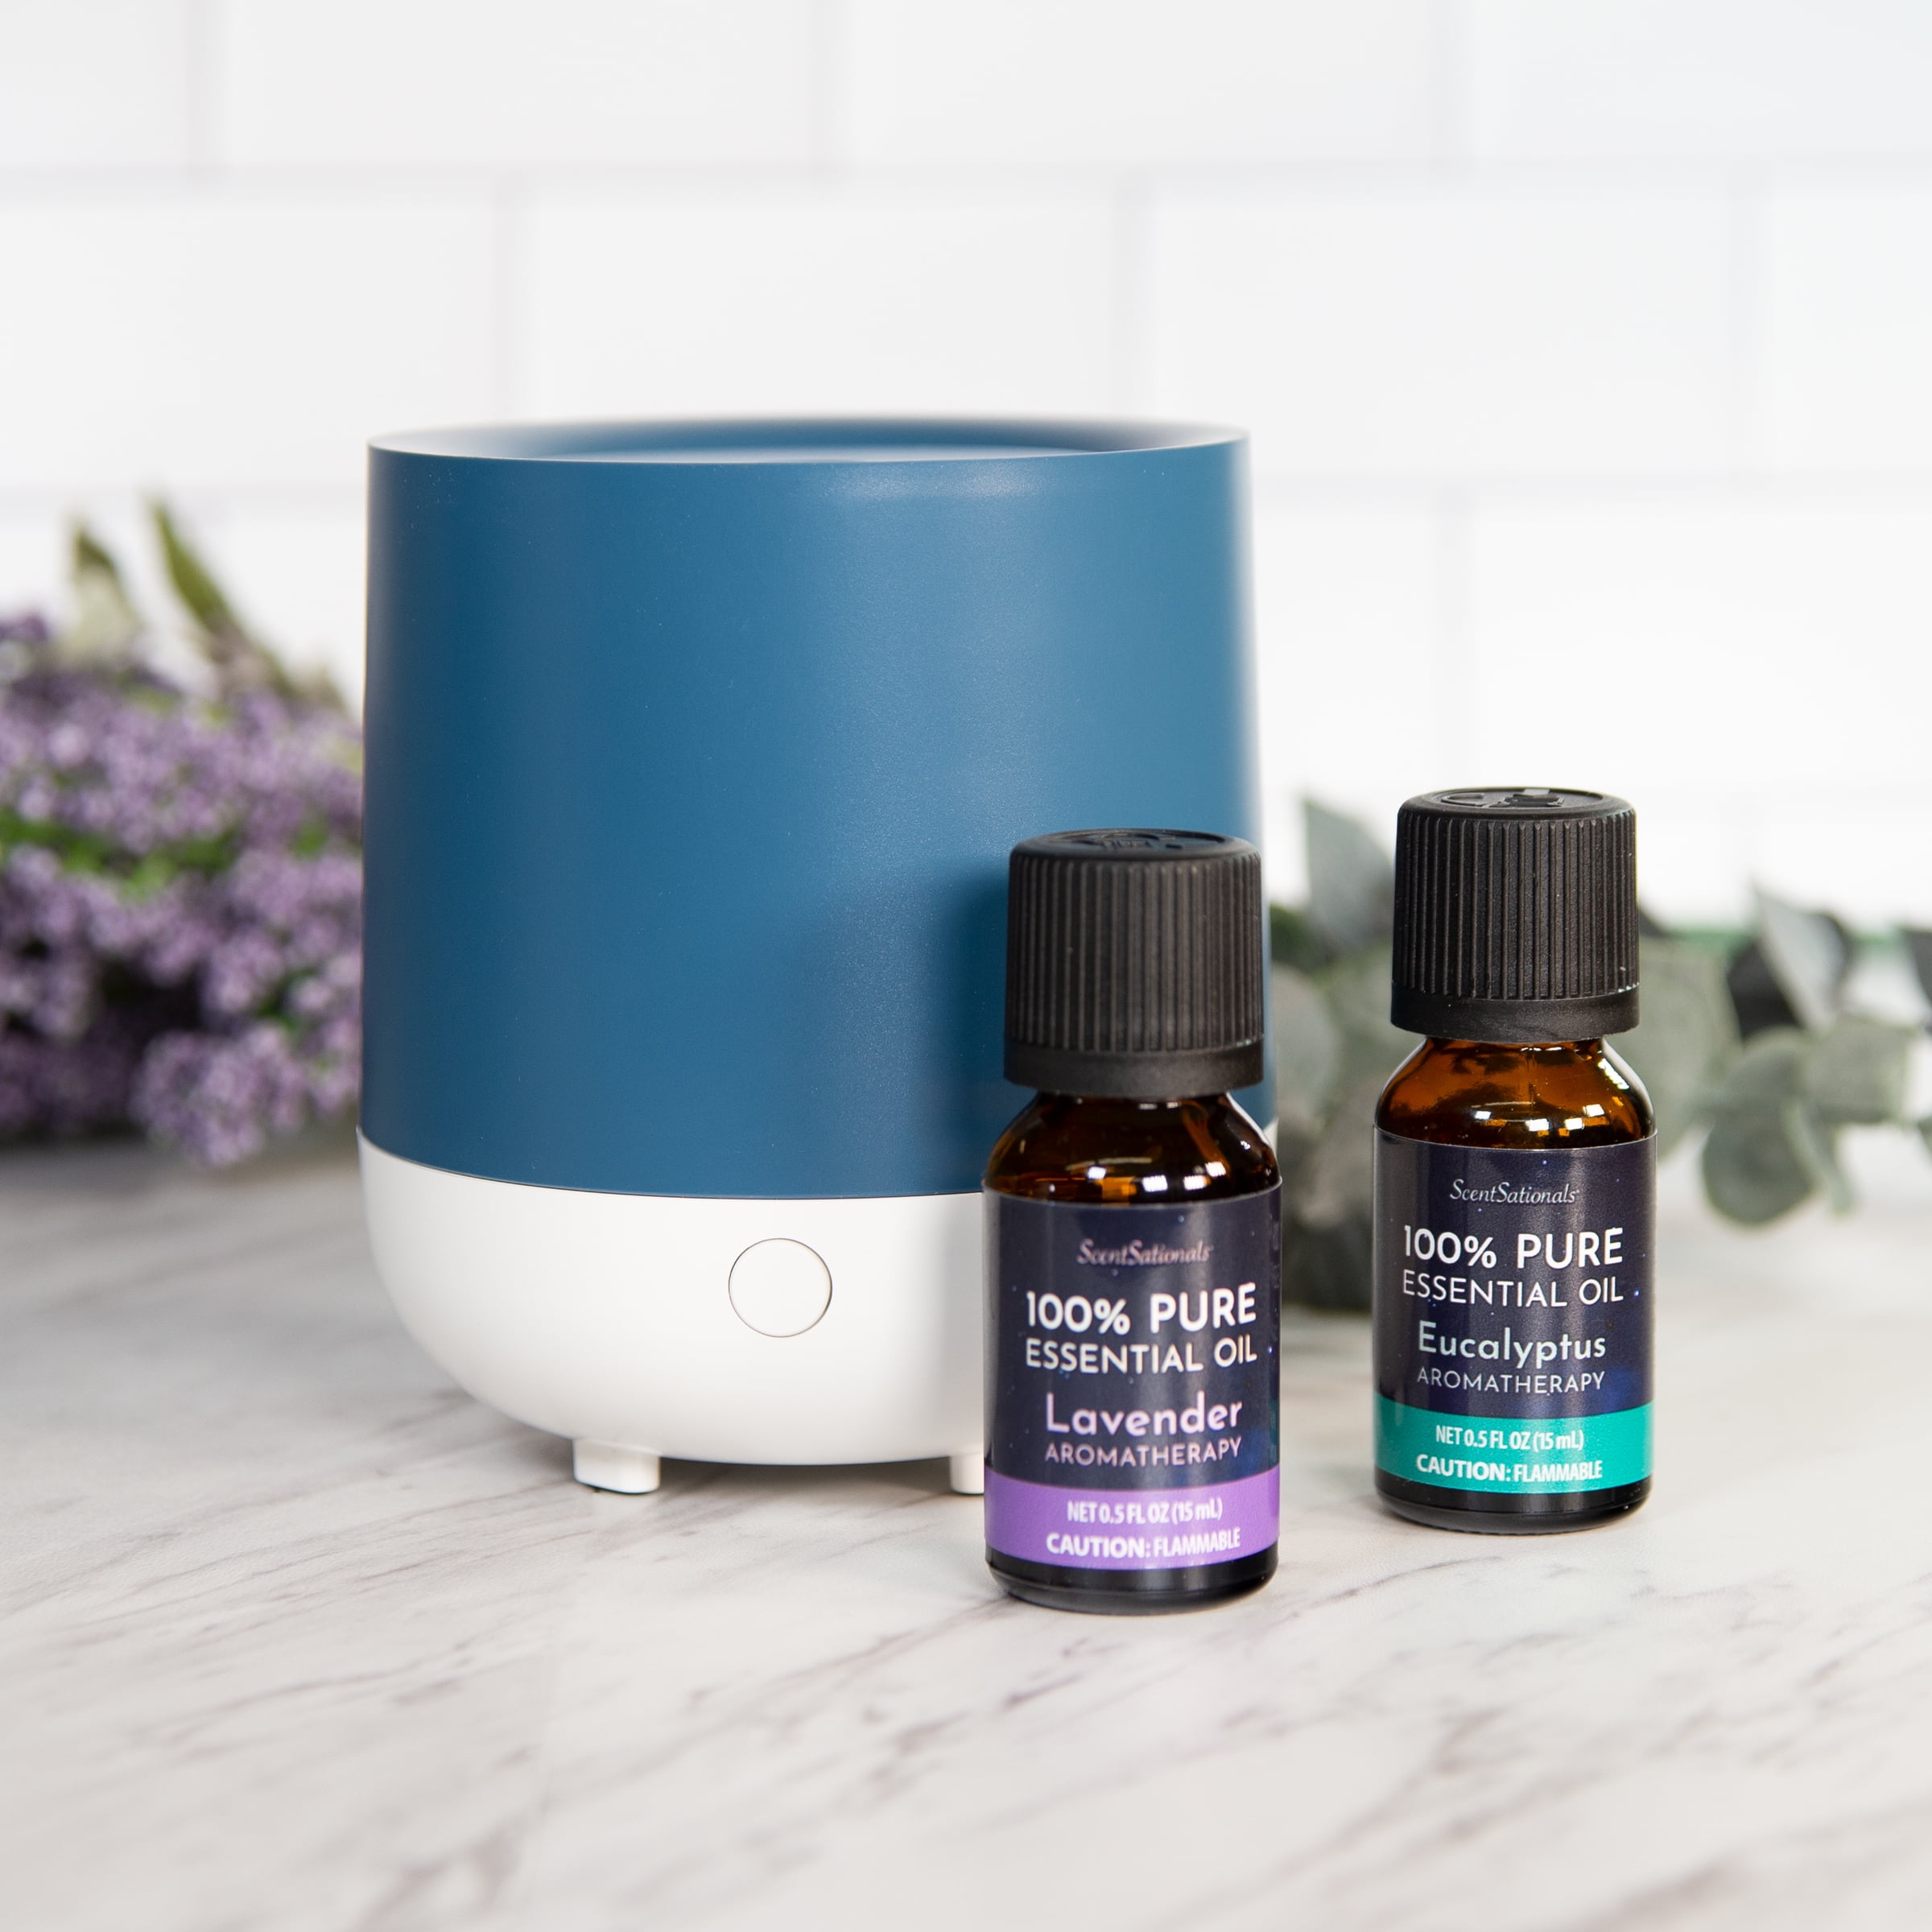 🛢️ Essential Oils Top 6 Gift Set Pure Essential Oils for Diffuser,  Humidifier, Massage, - Diffusers & Fragrance Oil - Los Angeles, California, Facebook Marketplace